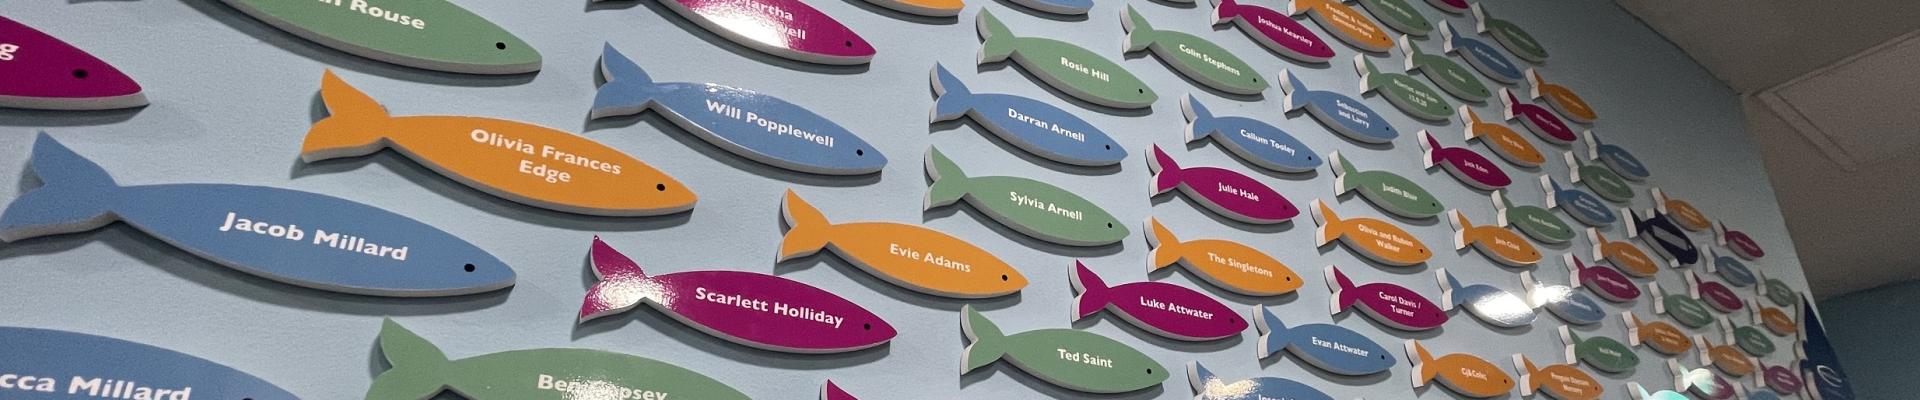 Friends of The Deep colourful and personalised fish plaques on the wall in The Deep's Reception area.